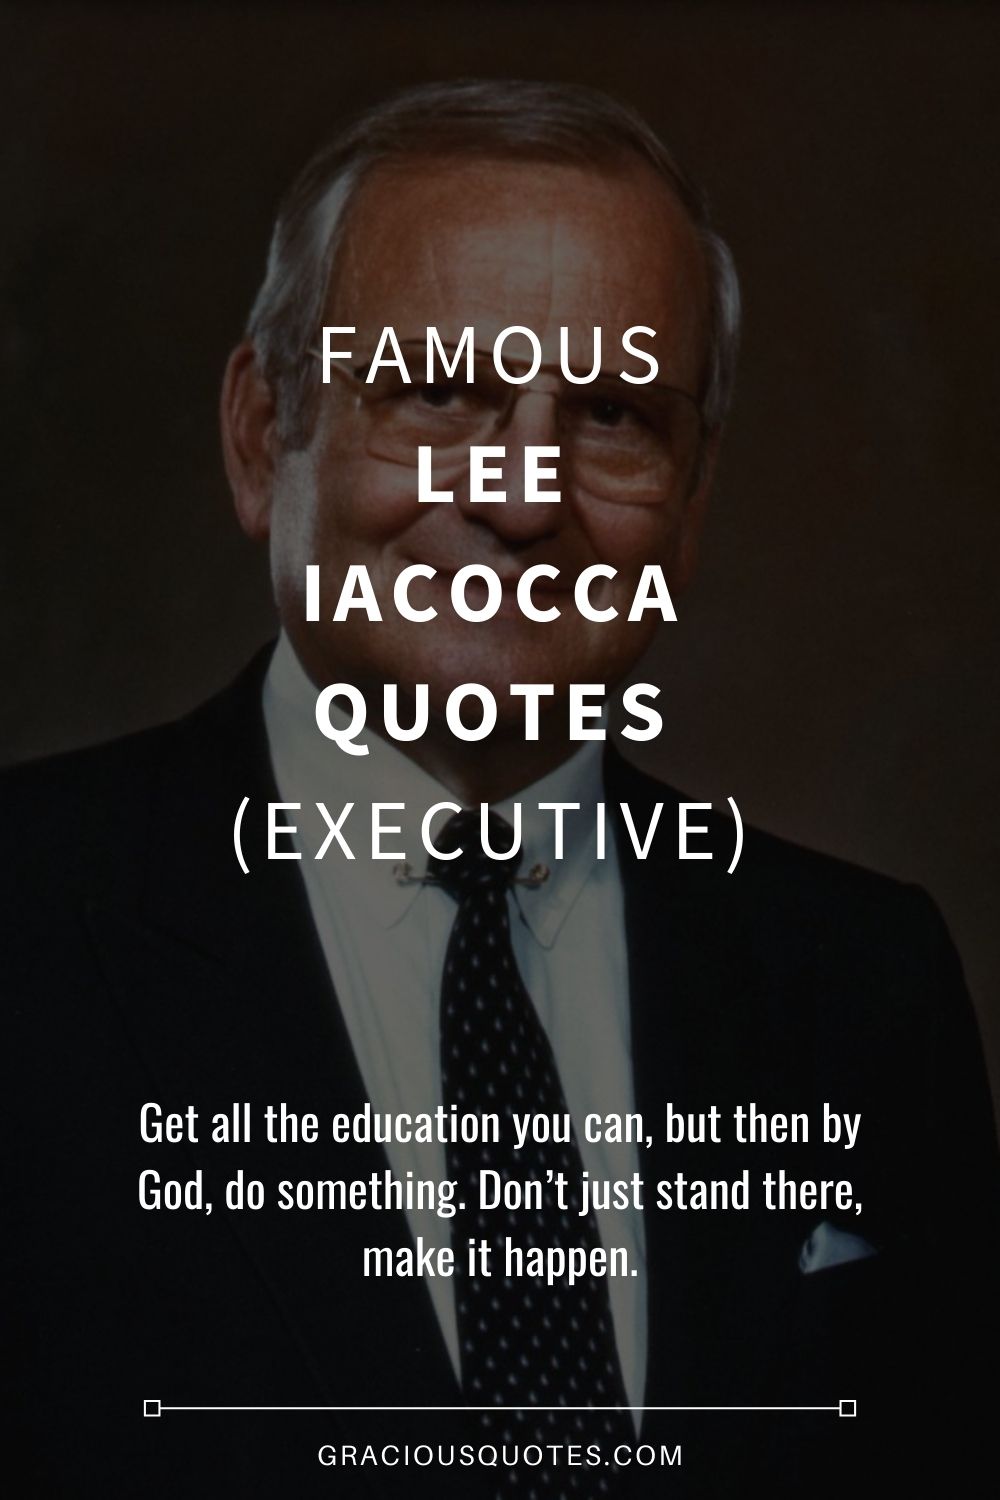 Famous Lee Iacocca Quotes (EXECUTIVE) - Gracious Quotes